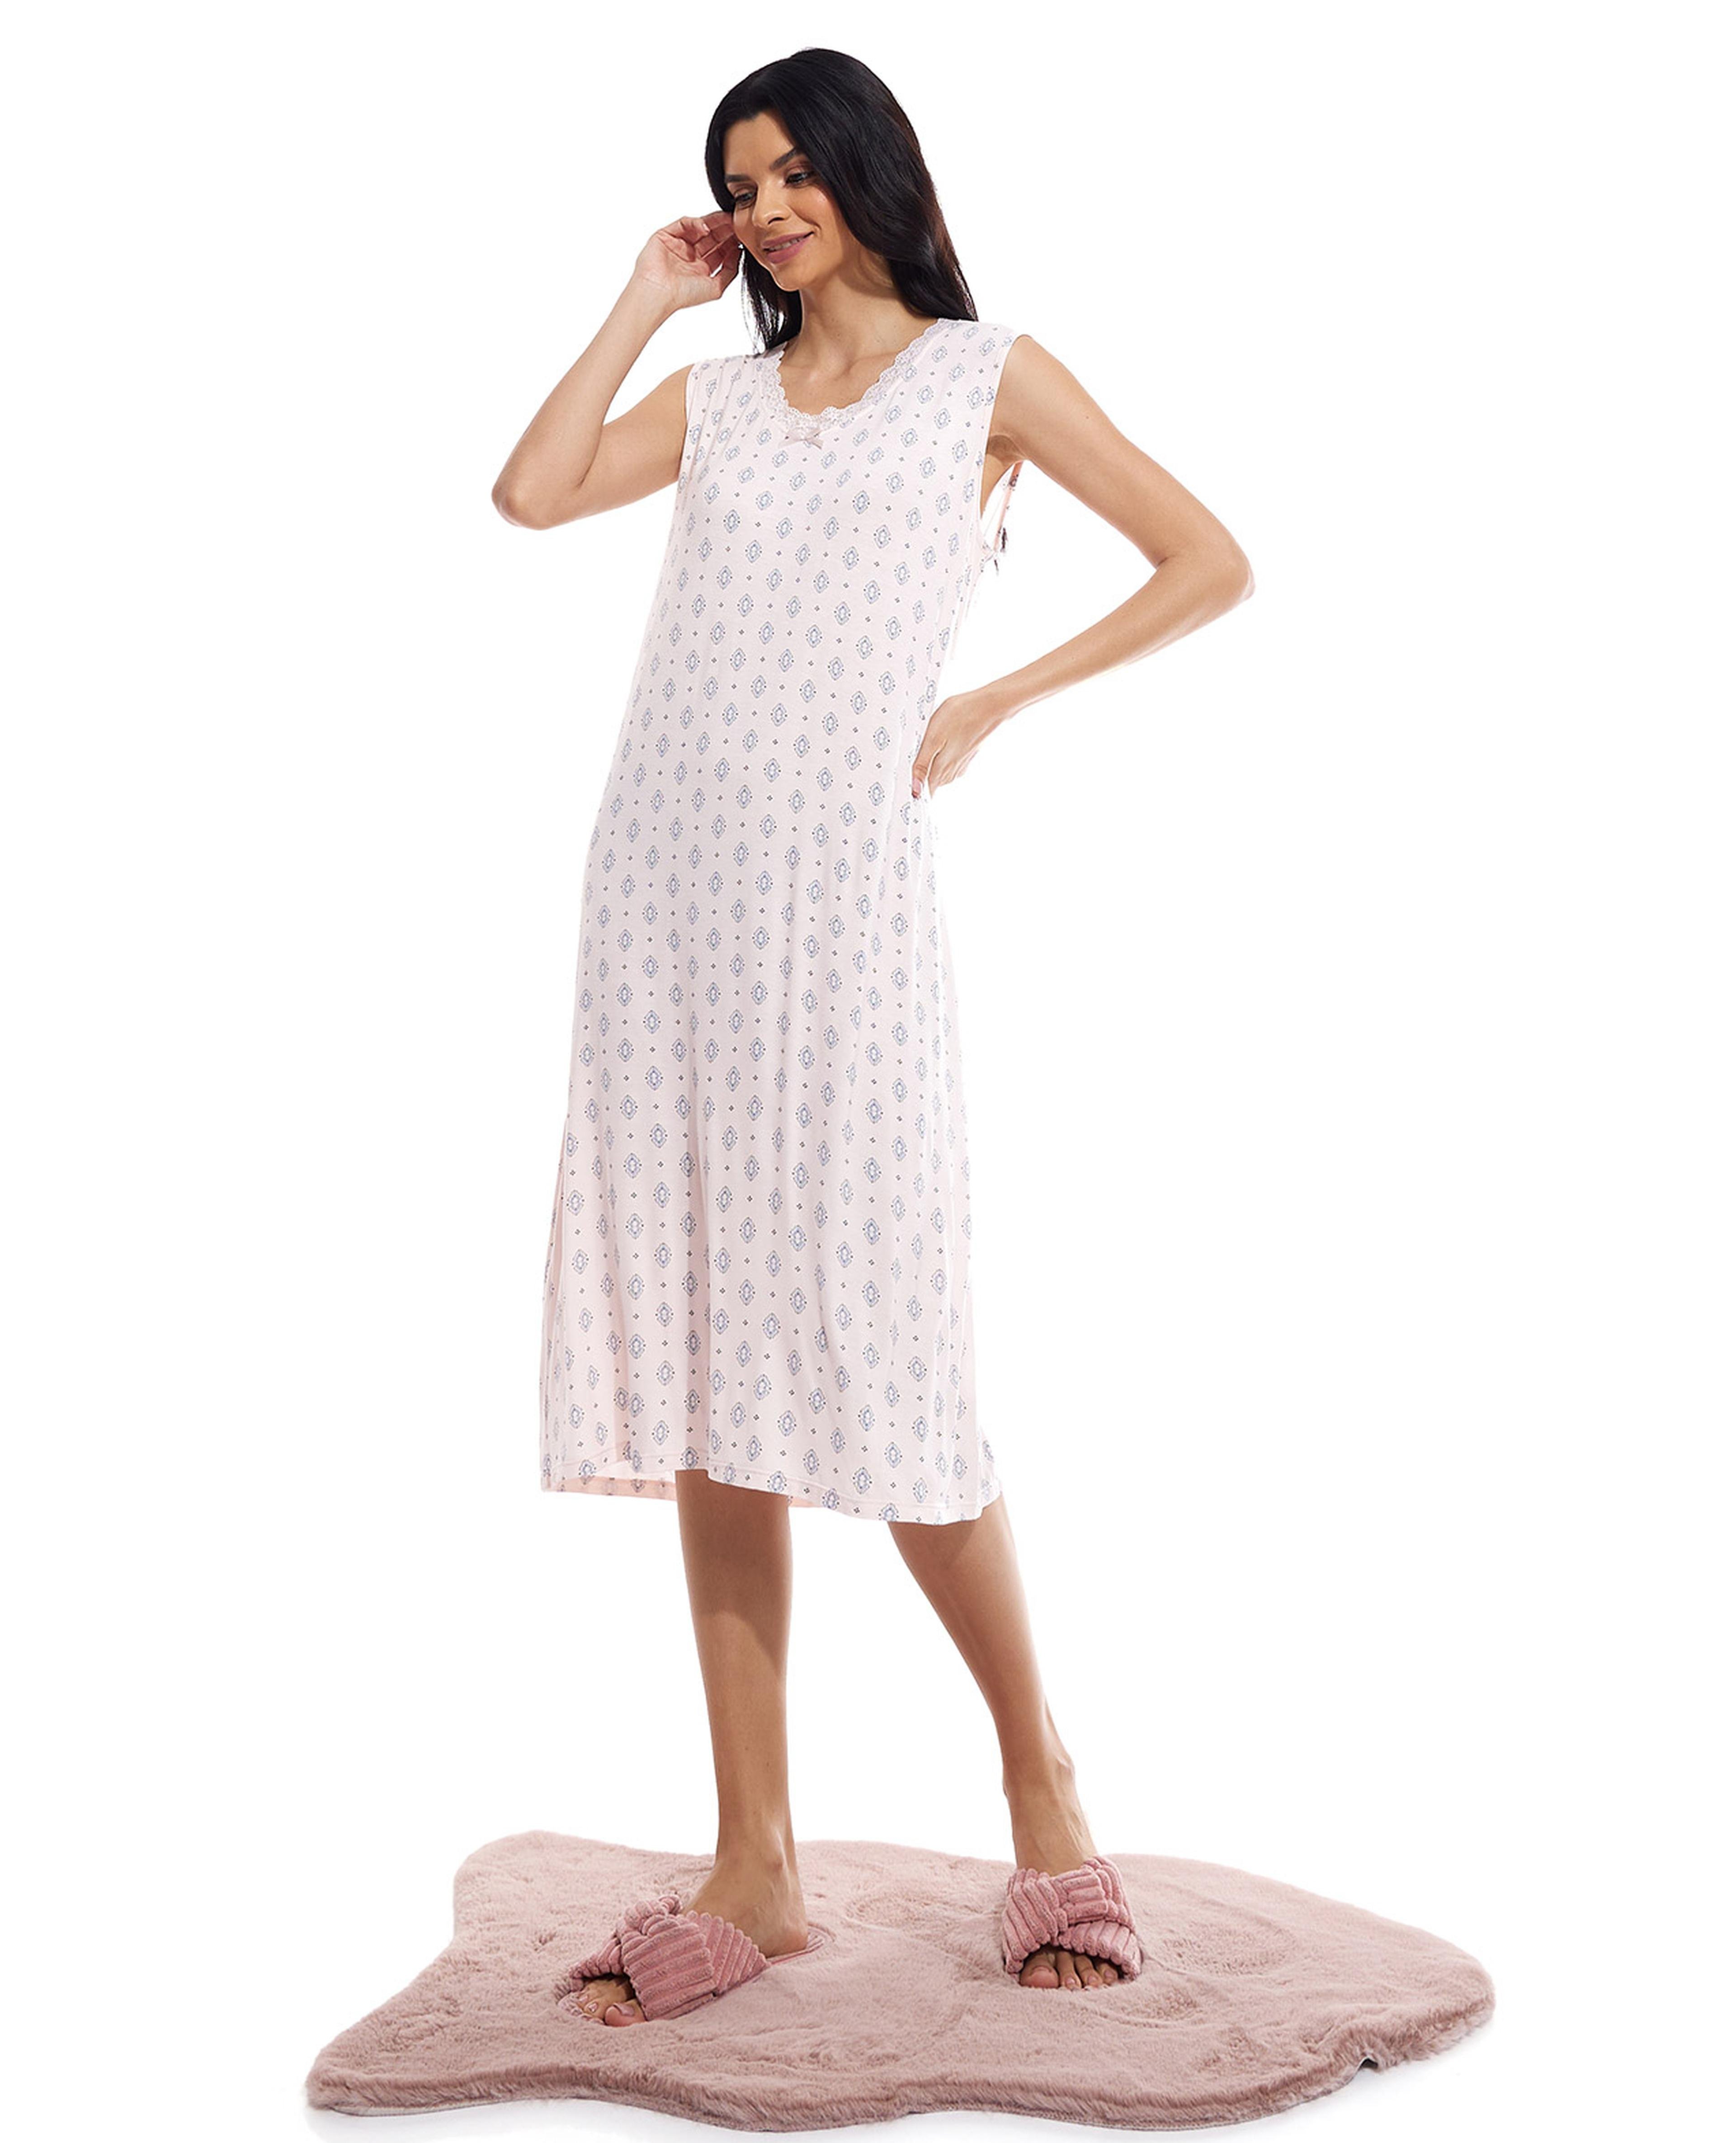 Patterned Sleeveless Nightgown with V-Neck